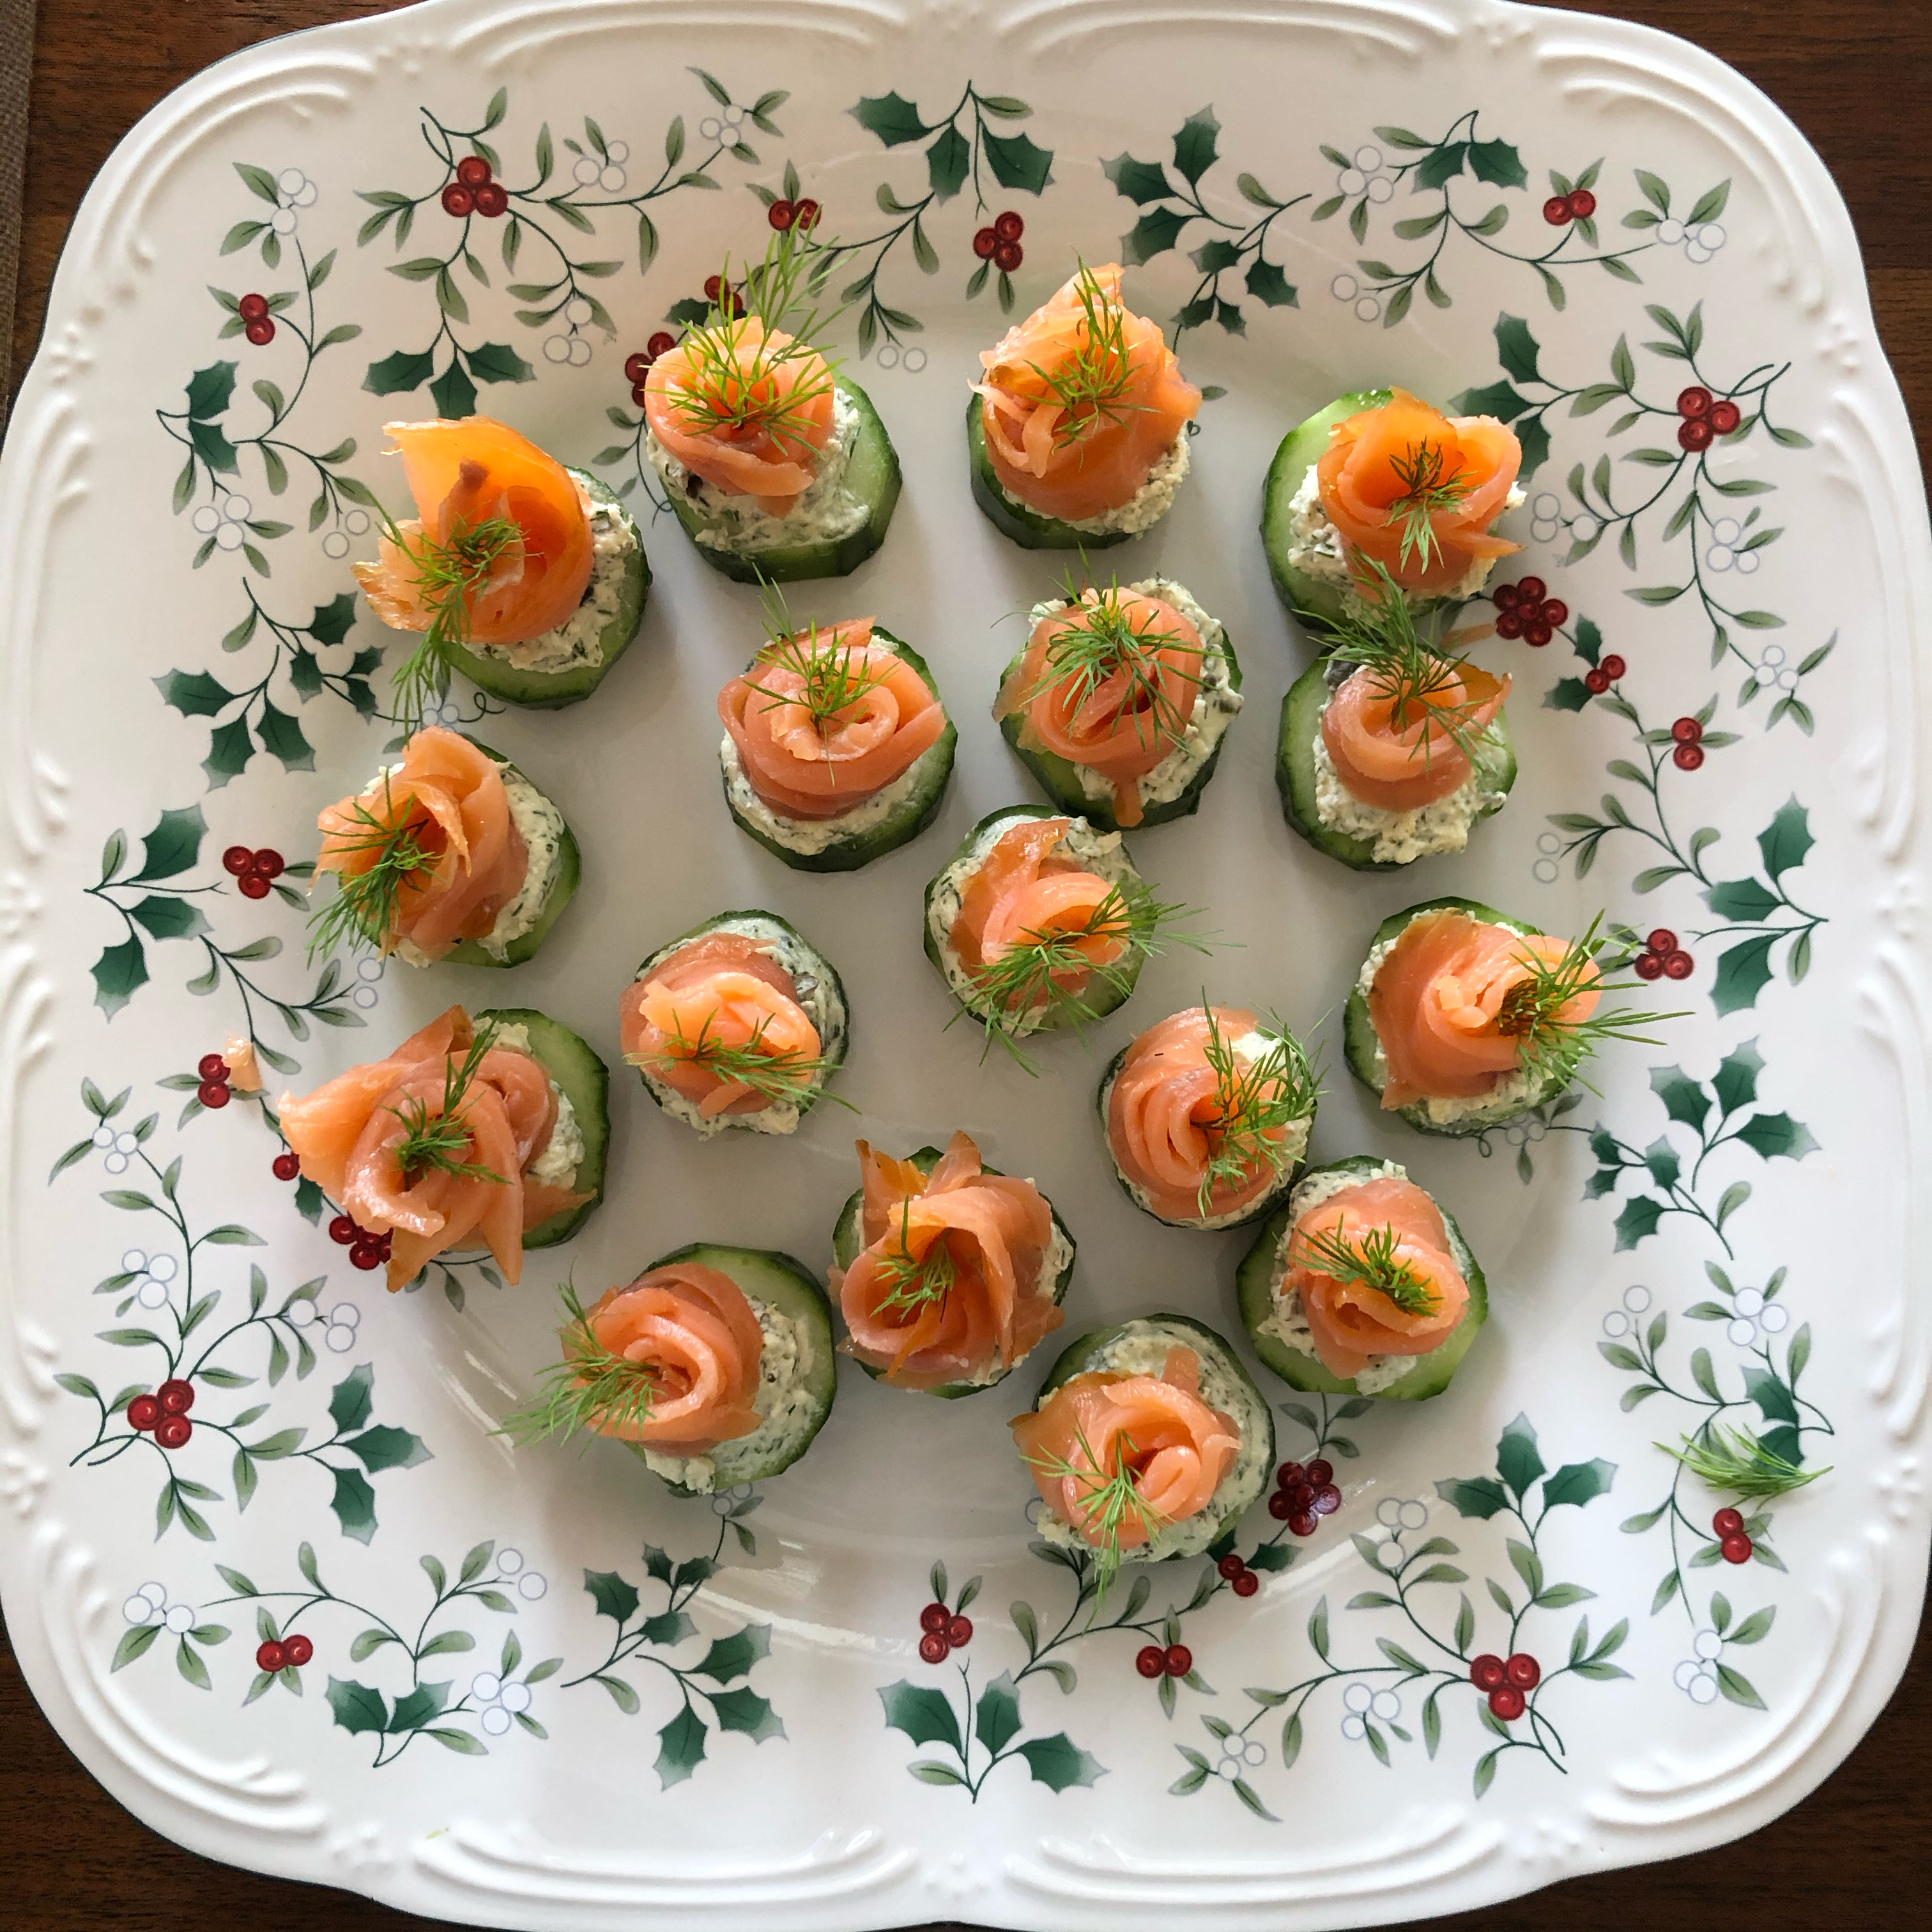 Cucumber Cups with Dill Cream and Smoked Salmon Tracy Li